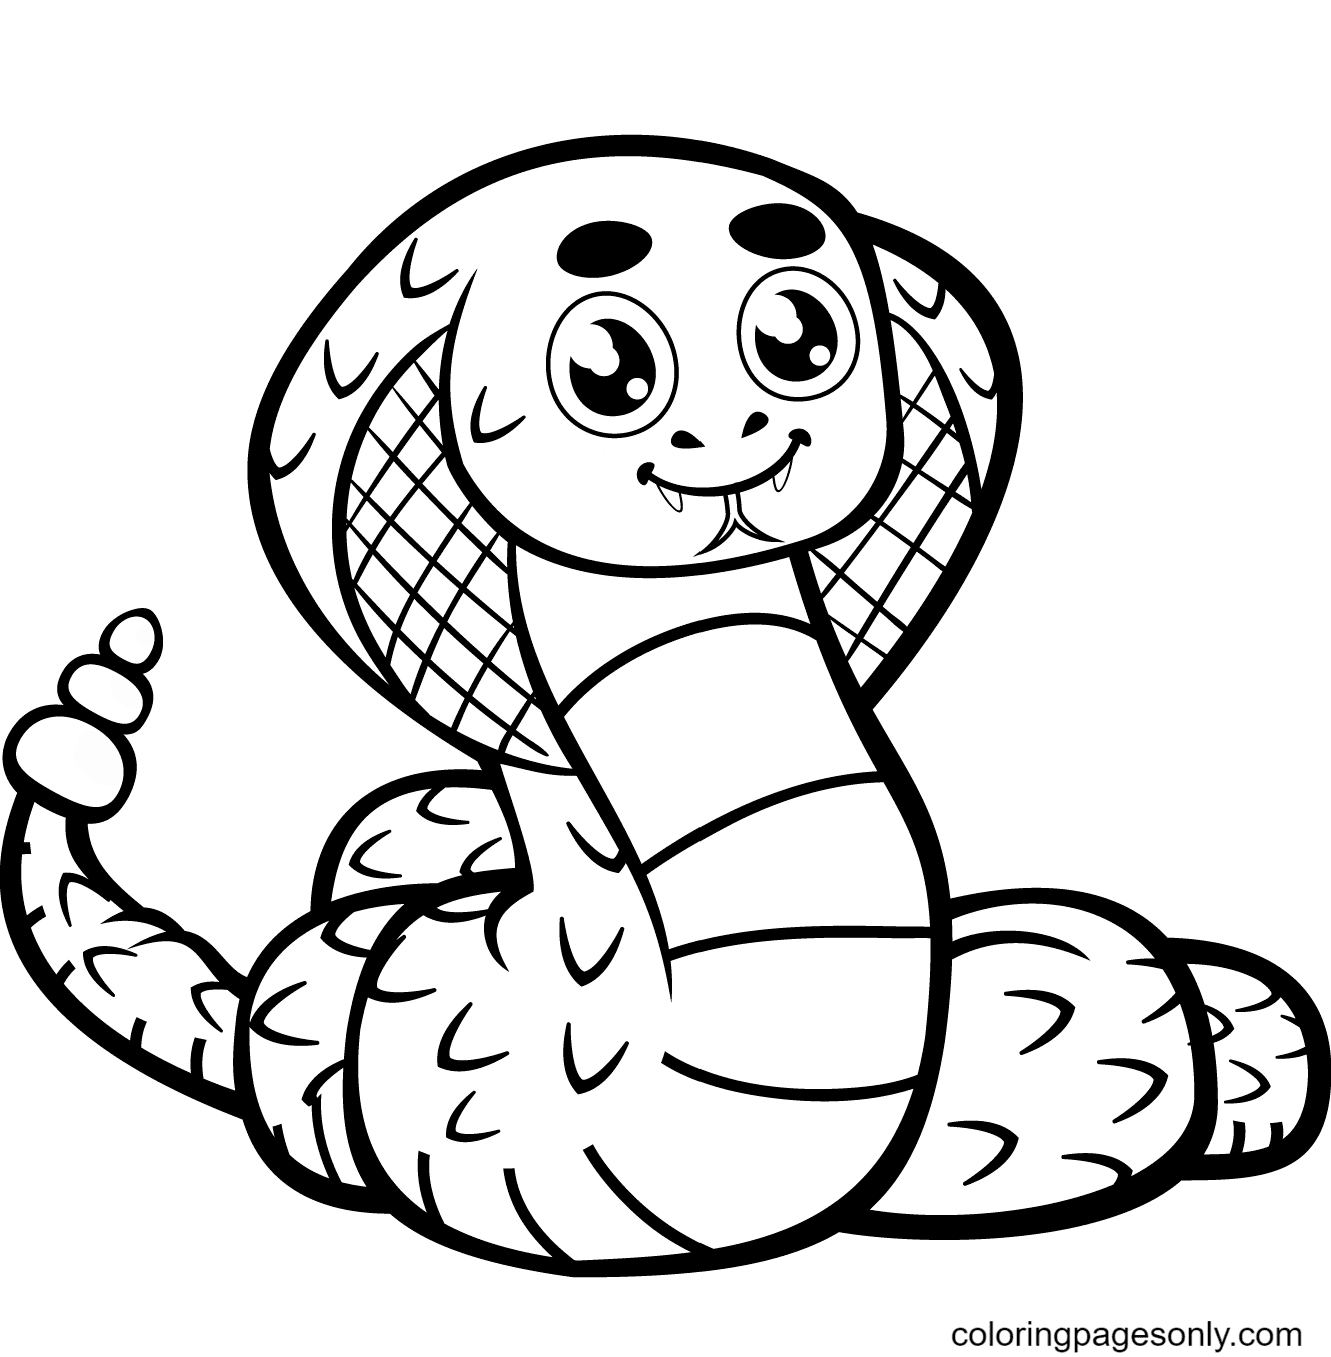 Cute Cobra Coloring Page